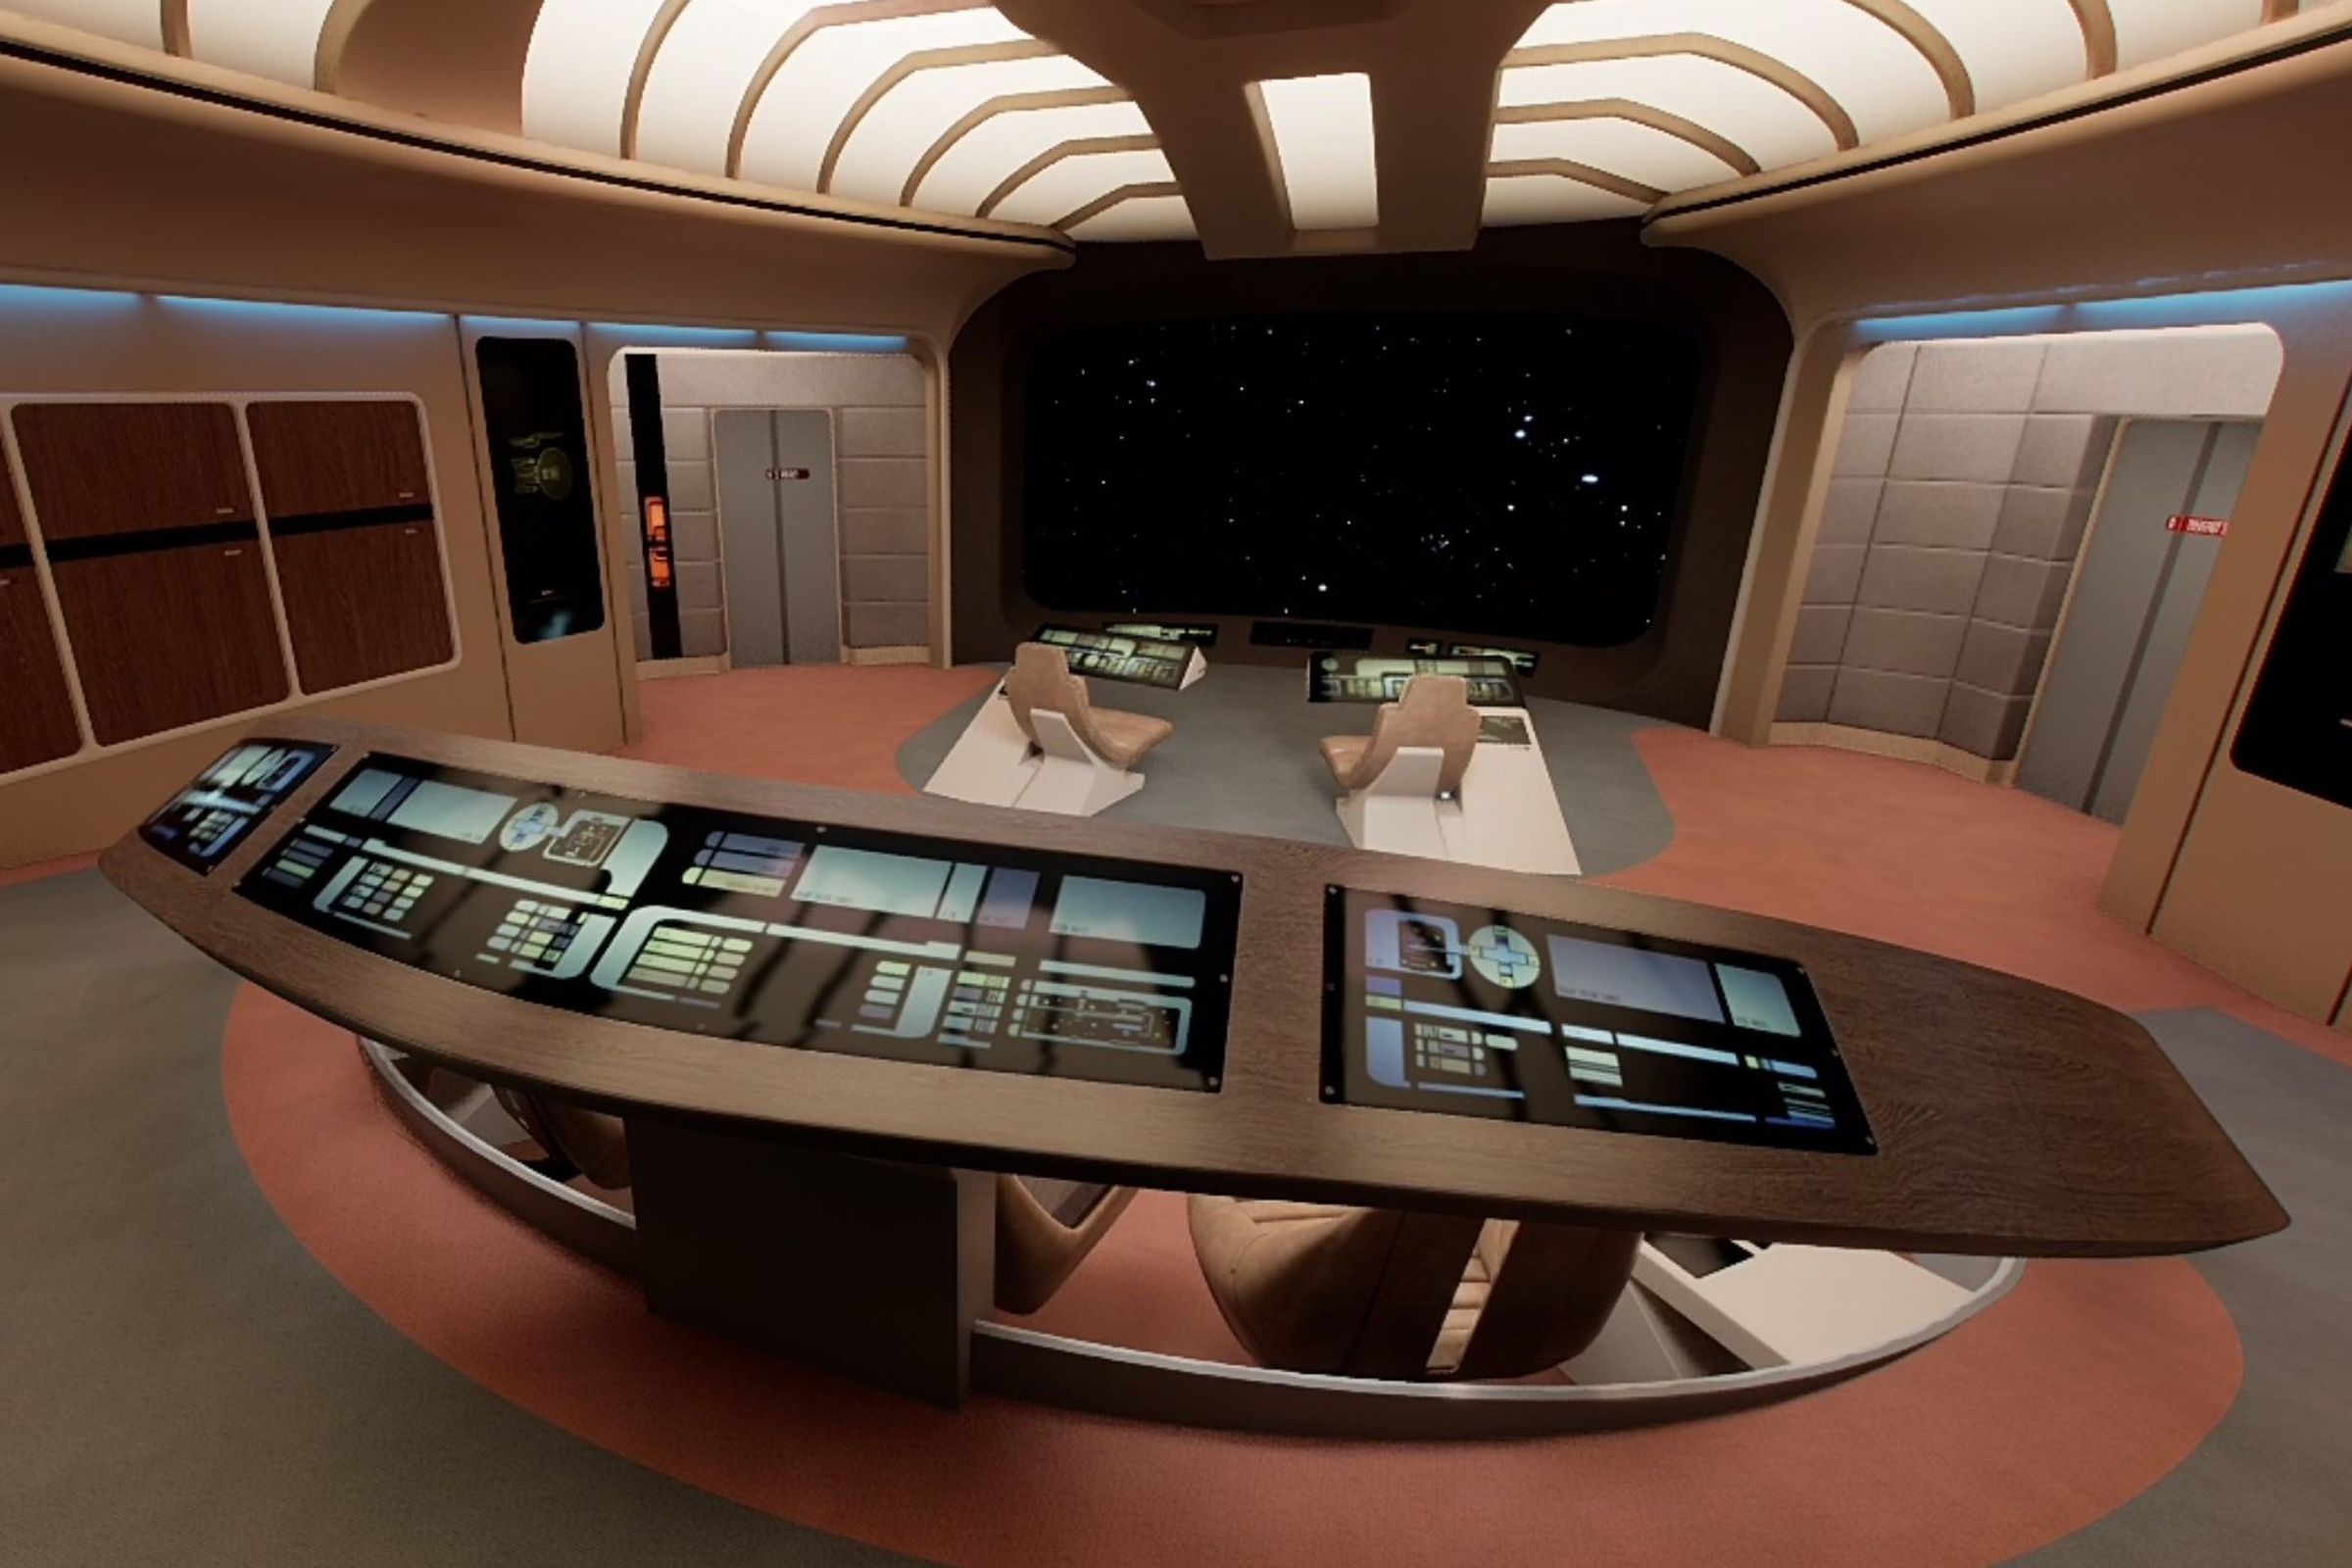 The bridge of the Enterprise D from Star Trek with its curved tactical console.